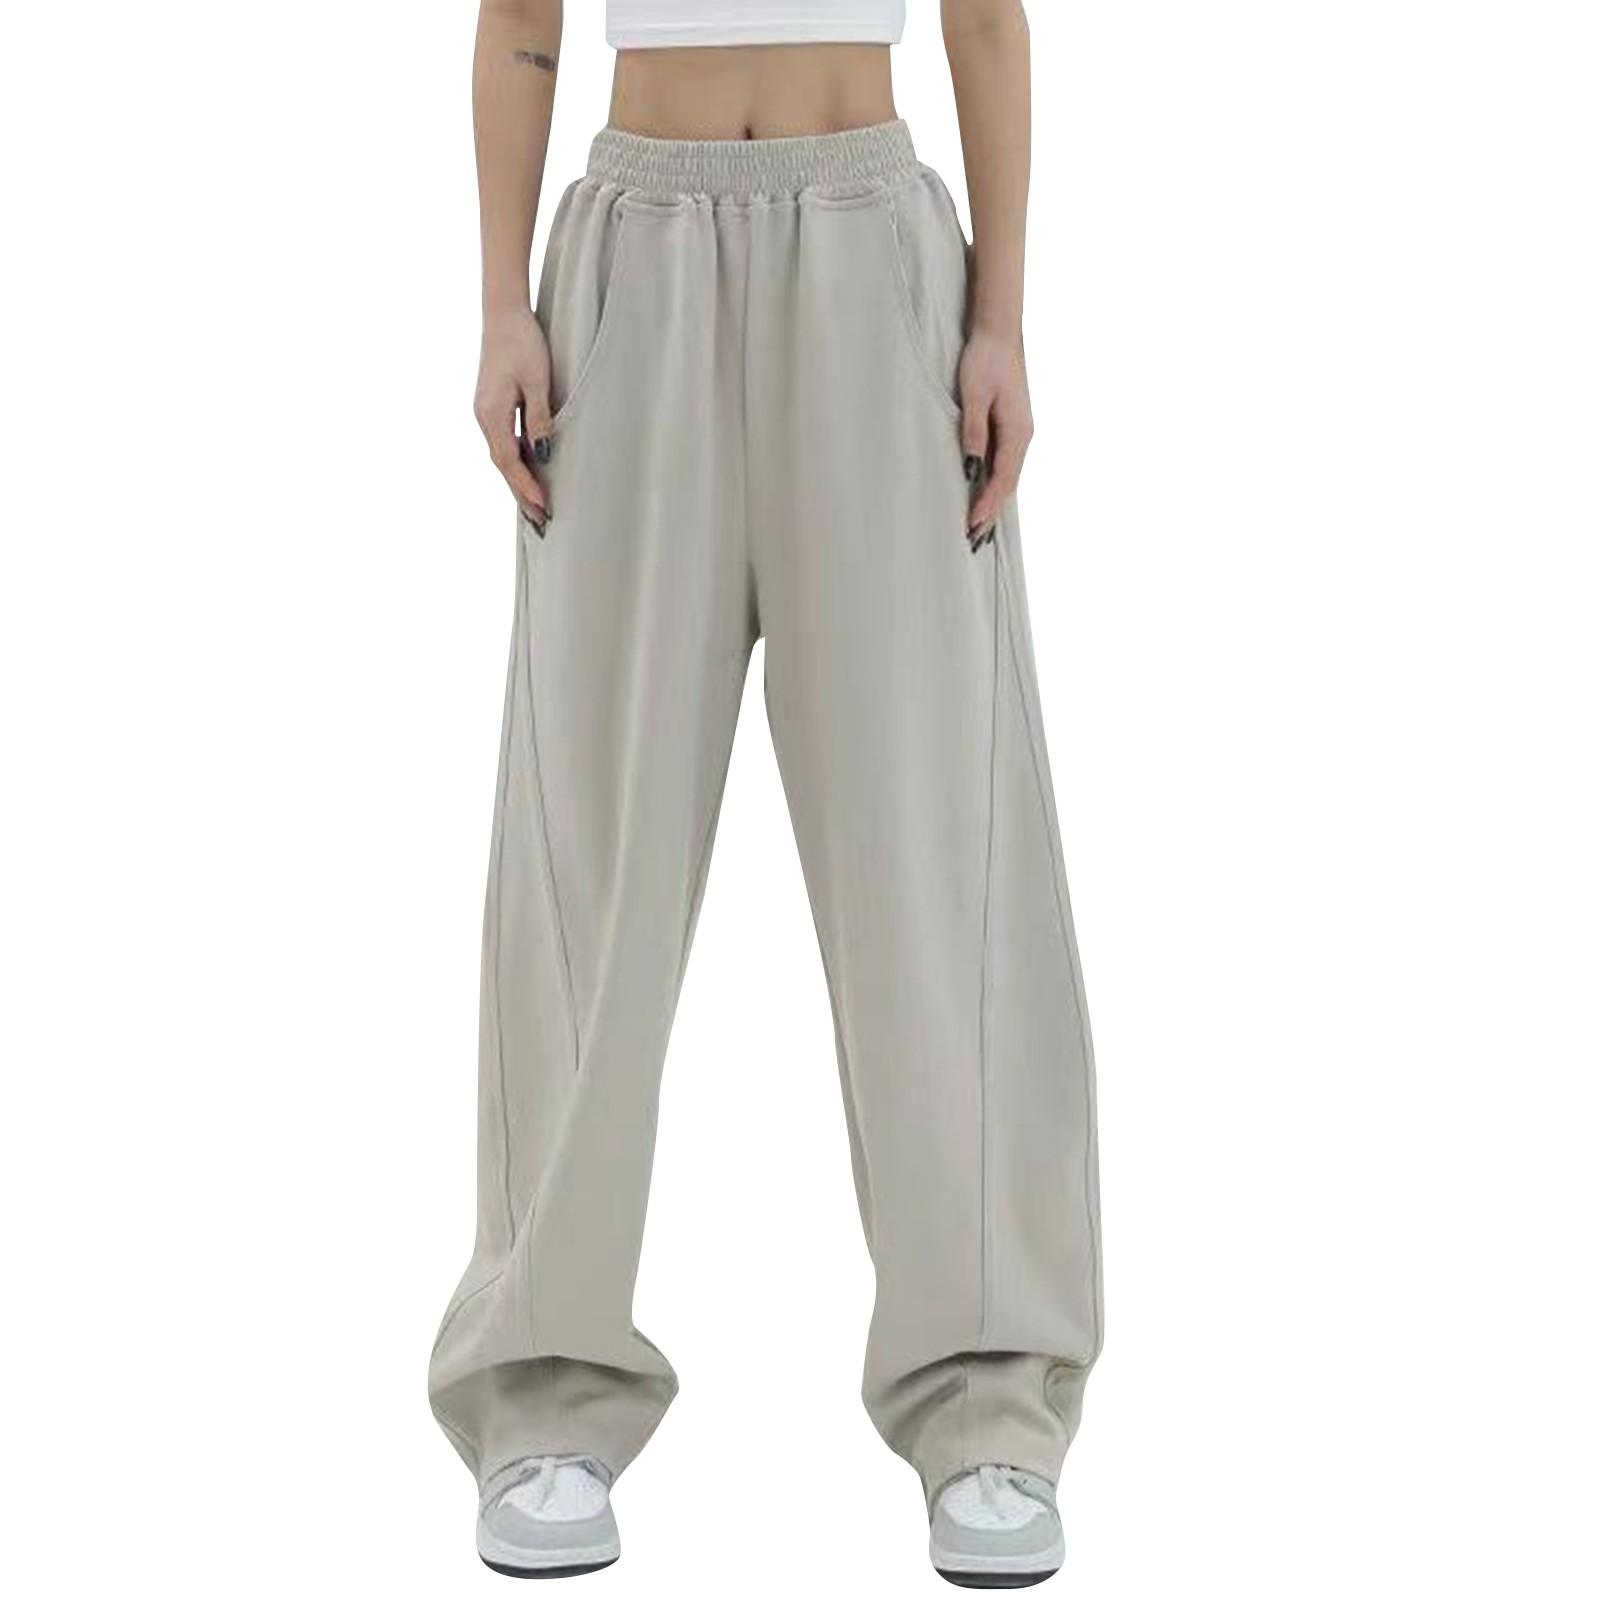 Dndkilg Womens Wide Leg Sweatpants with Pockets Casual Active Joggers ...